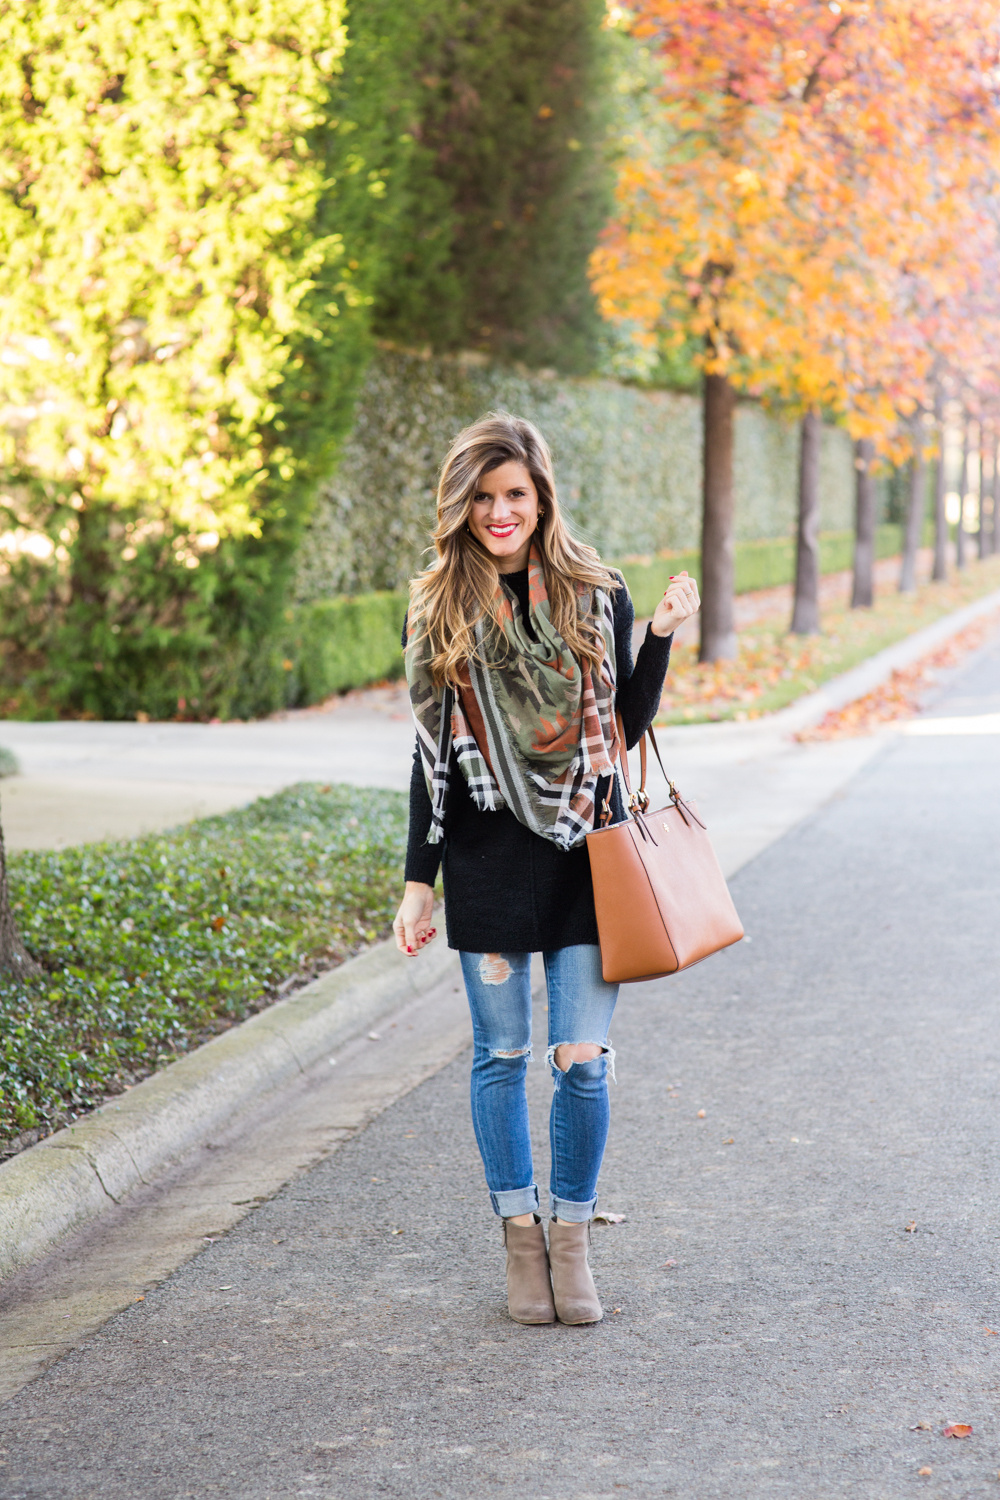 Tunic and Scarf Outfit + Ripped Jeans + Ankle Booties